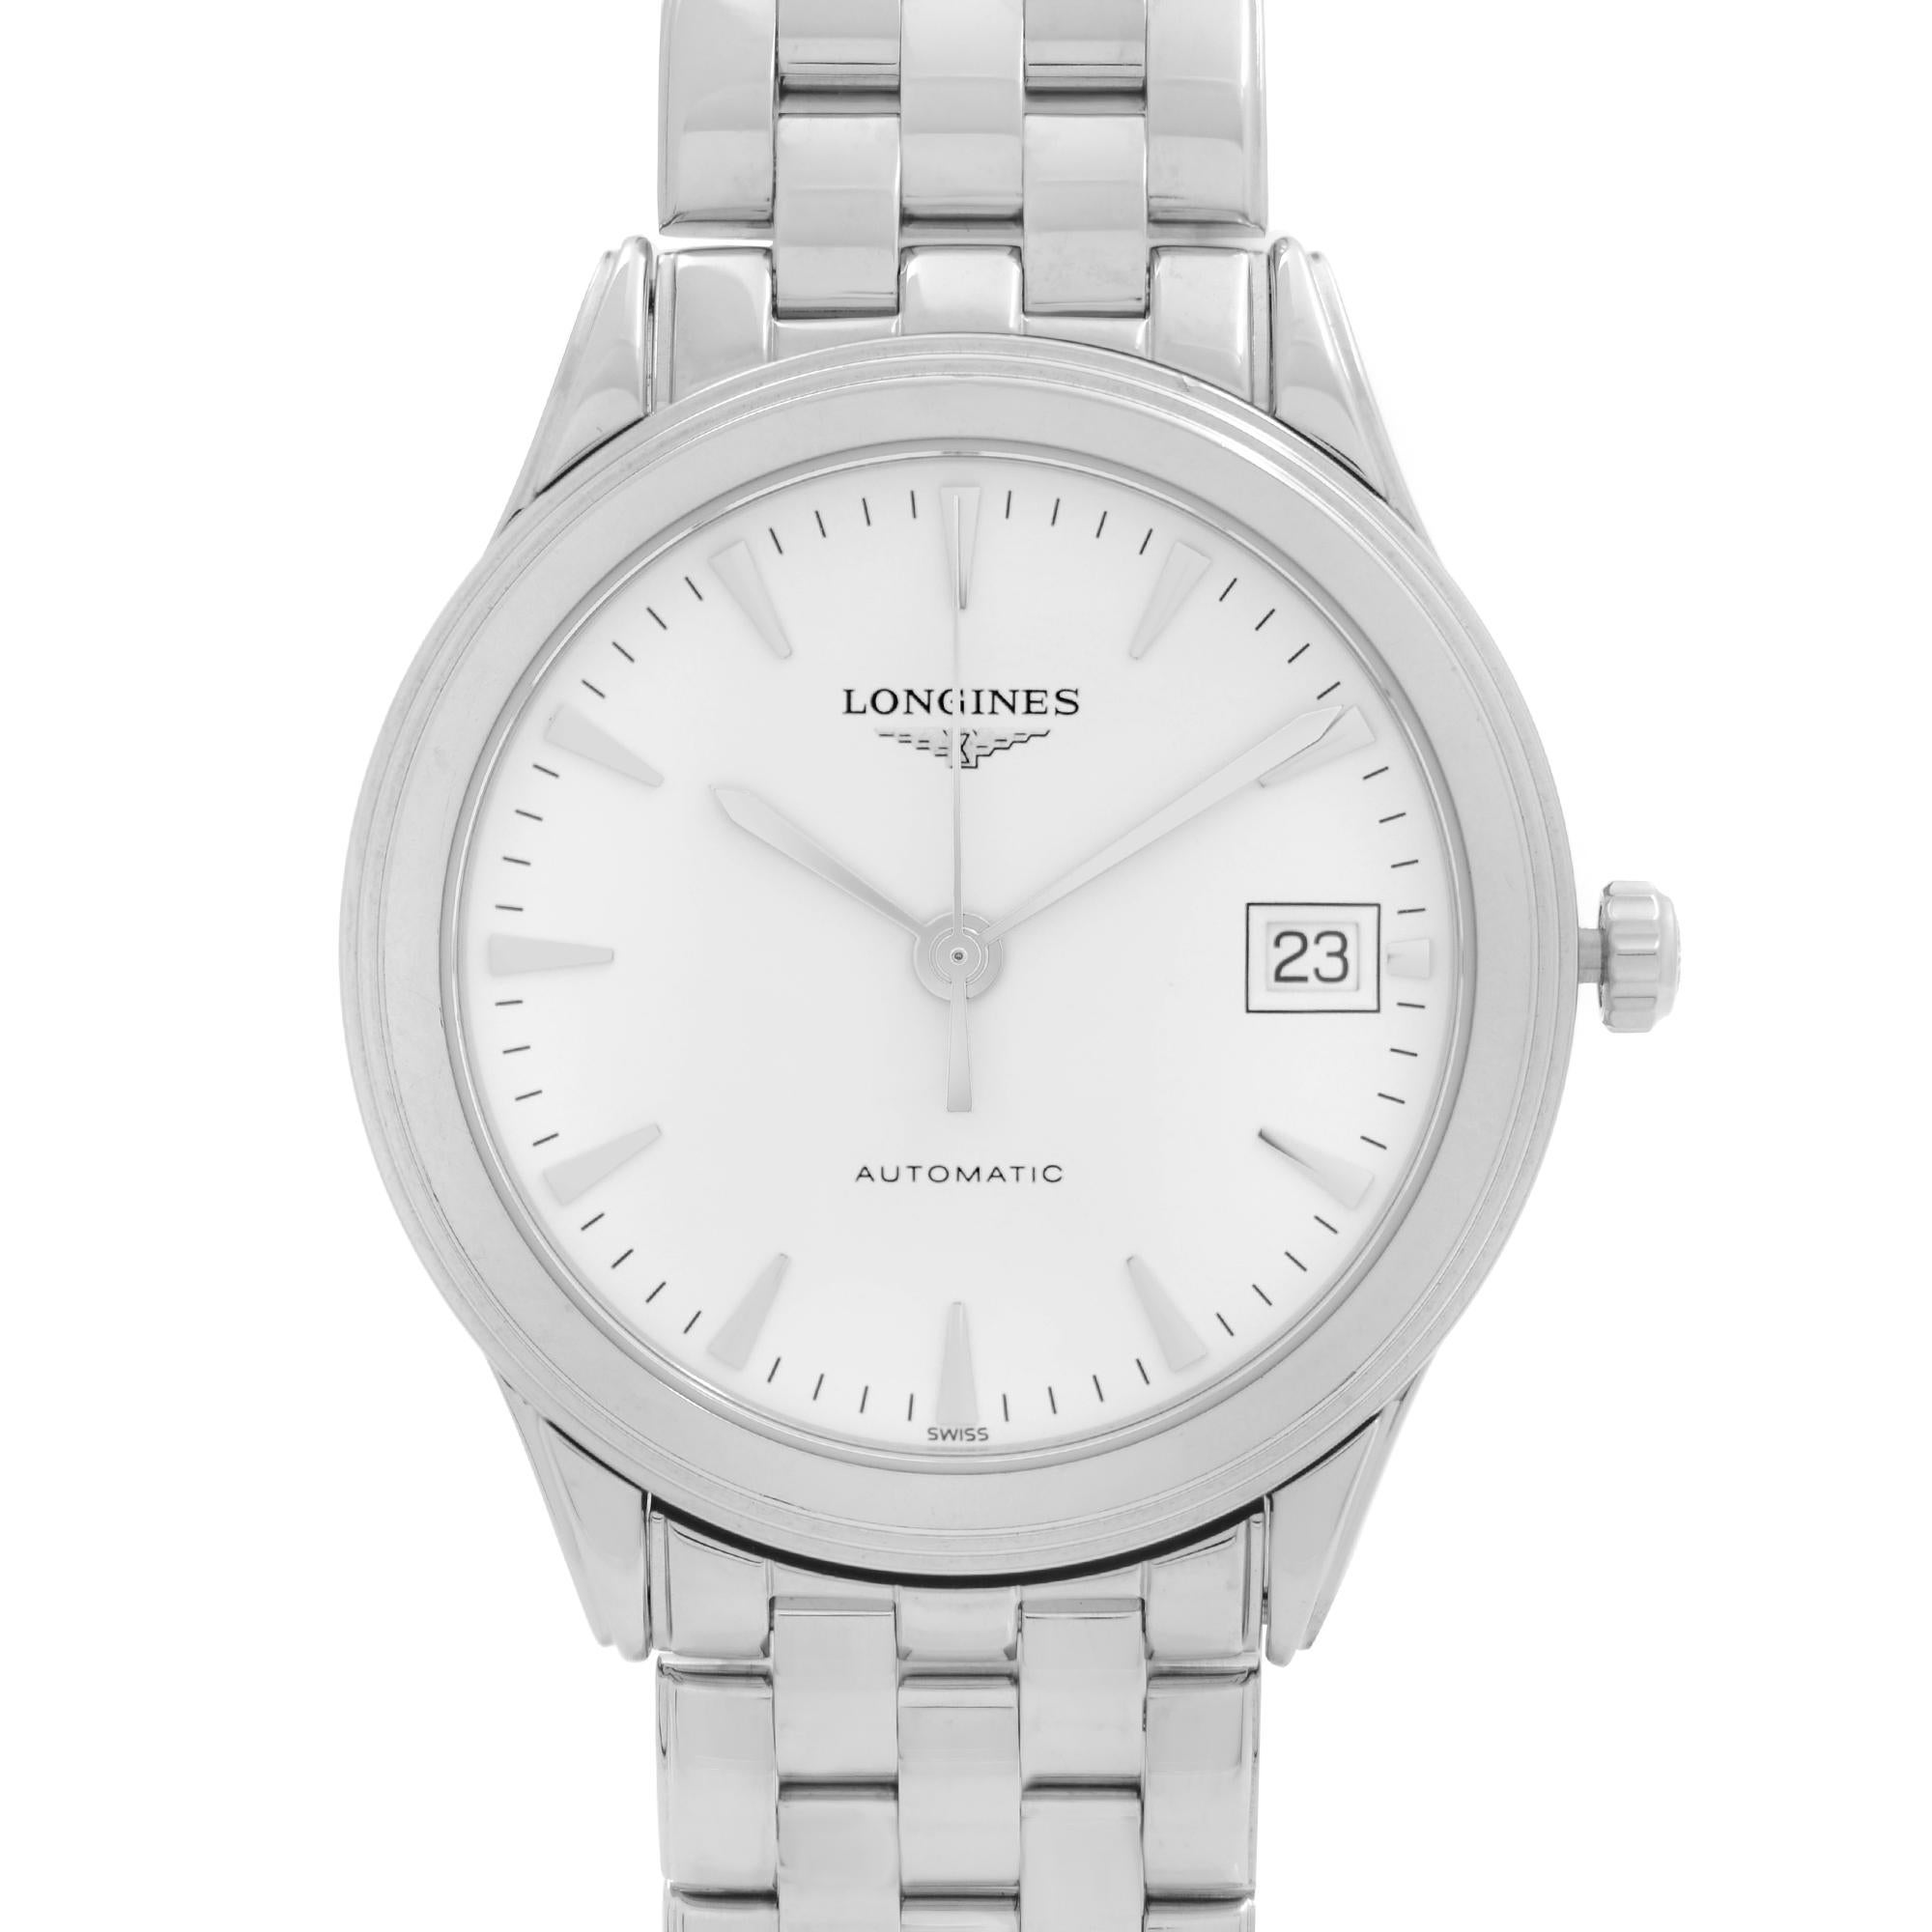 Display Model Longines Flagship Stainless Steel White Dial Automatic Mens Watch L4.774.4.12.6. This Beautiful Timepiece is Powered by Mechanical (Automatic) Movement And Features: Round Stainless Steel Case & Bracelet, Fixed Stainless Steel Bezel.